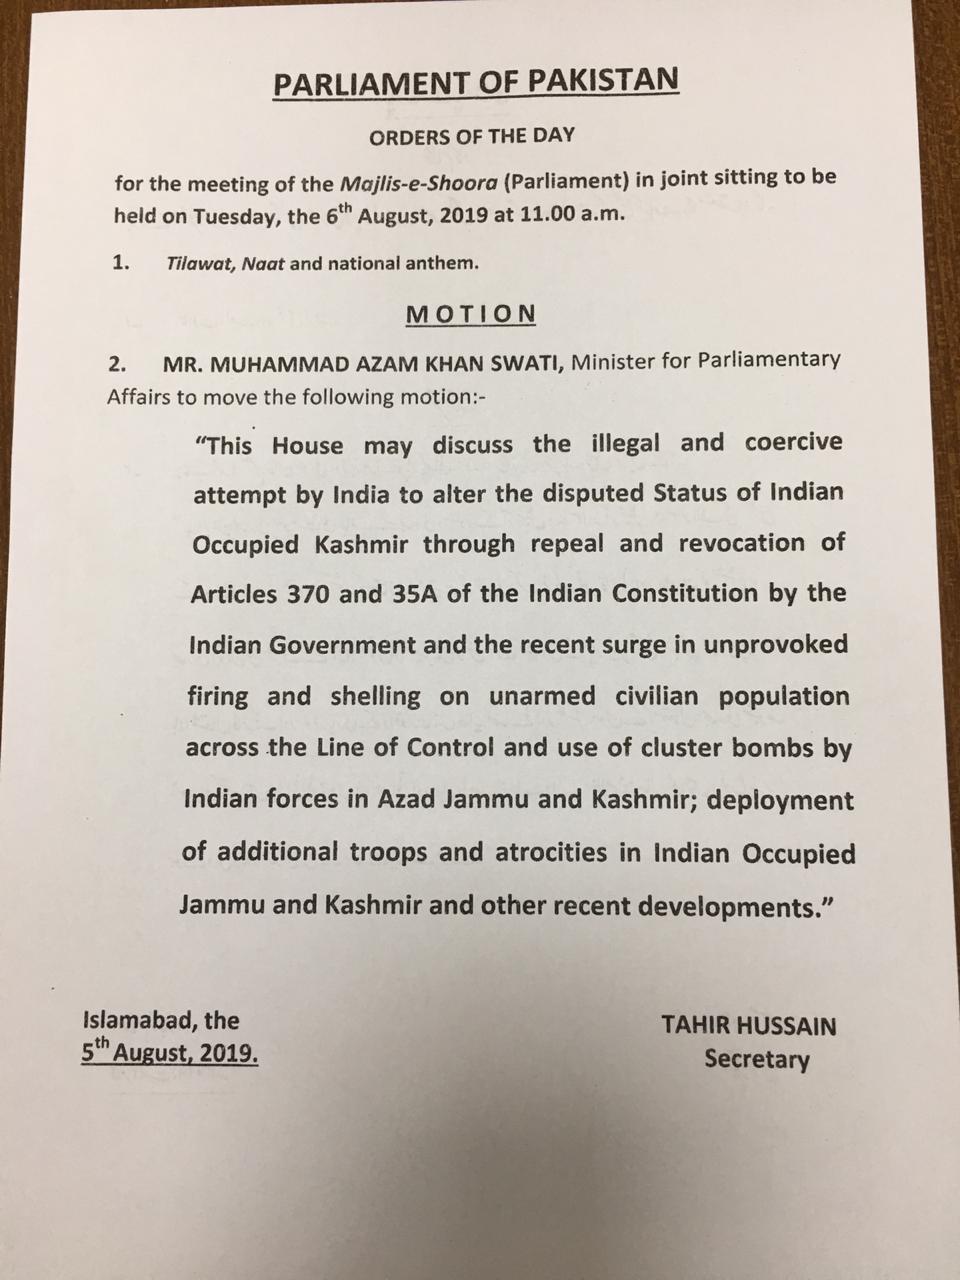 Amended resolution presented in Parliament against scrapping special status of IoK